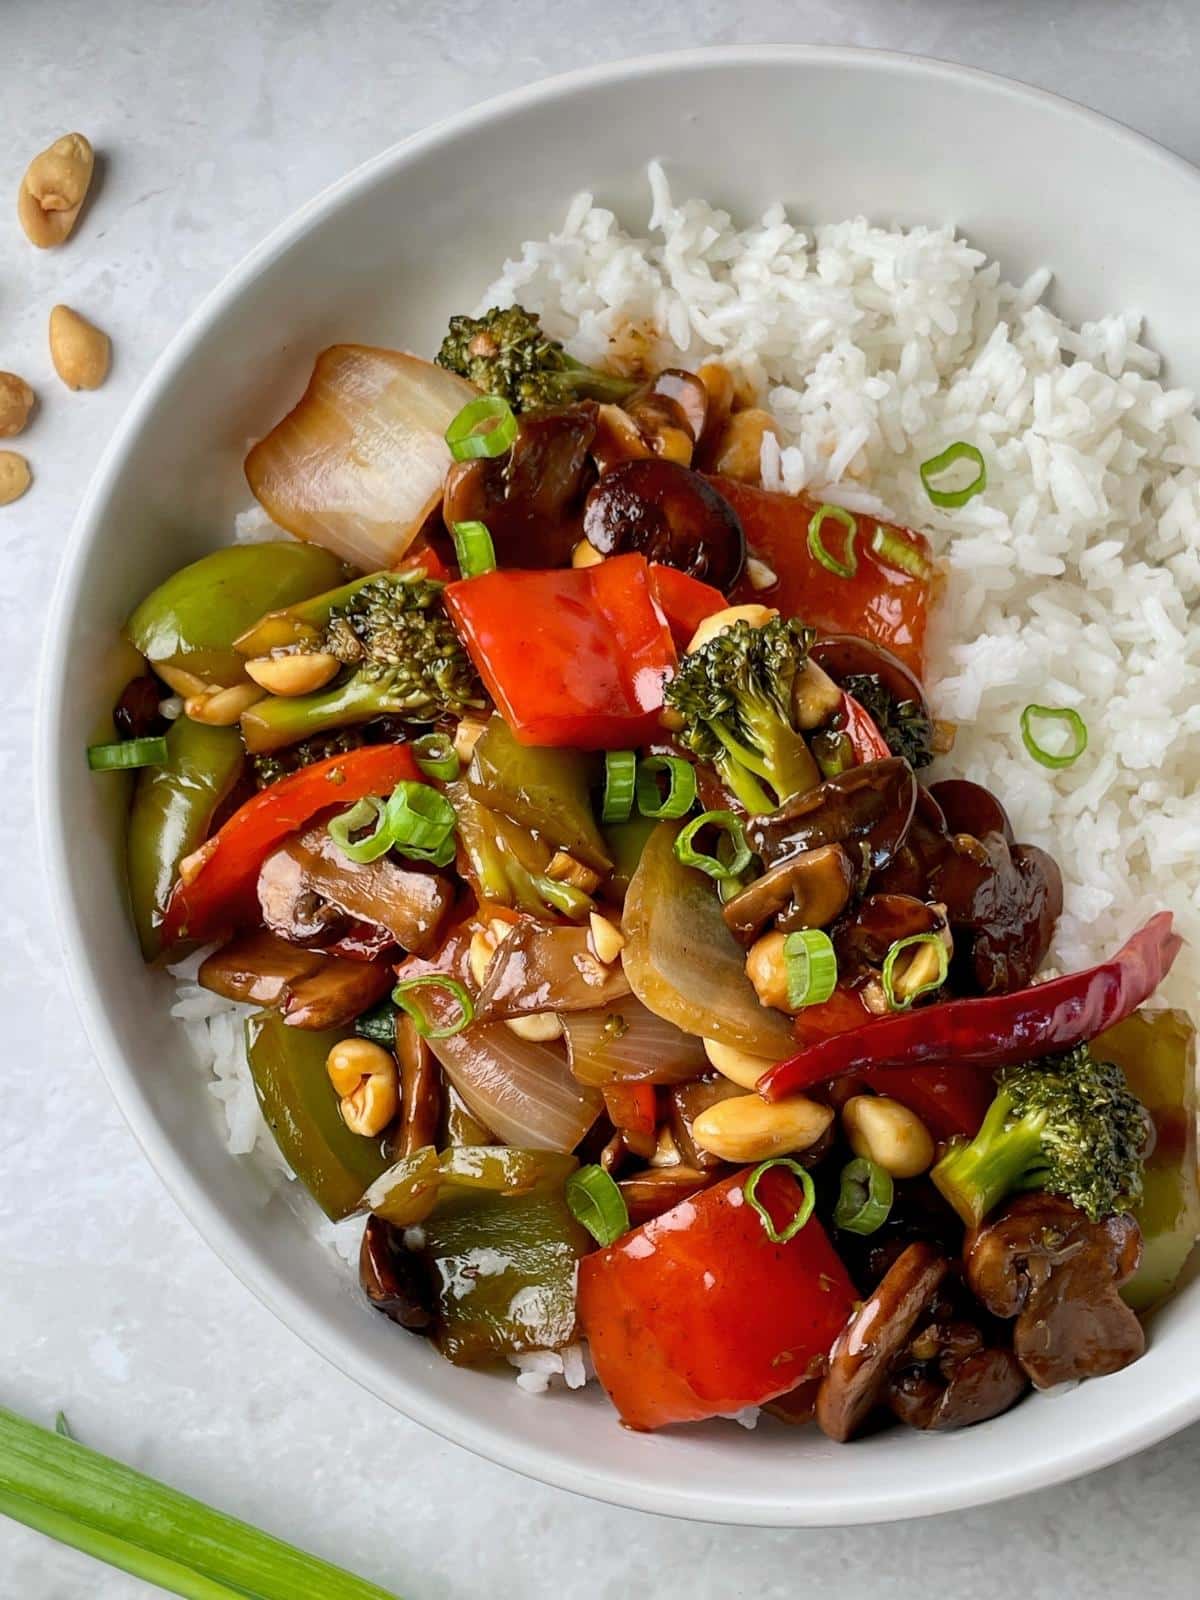 Vegetable kung pao.